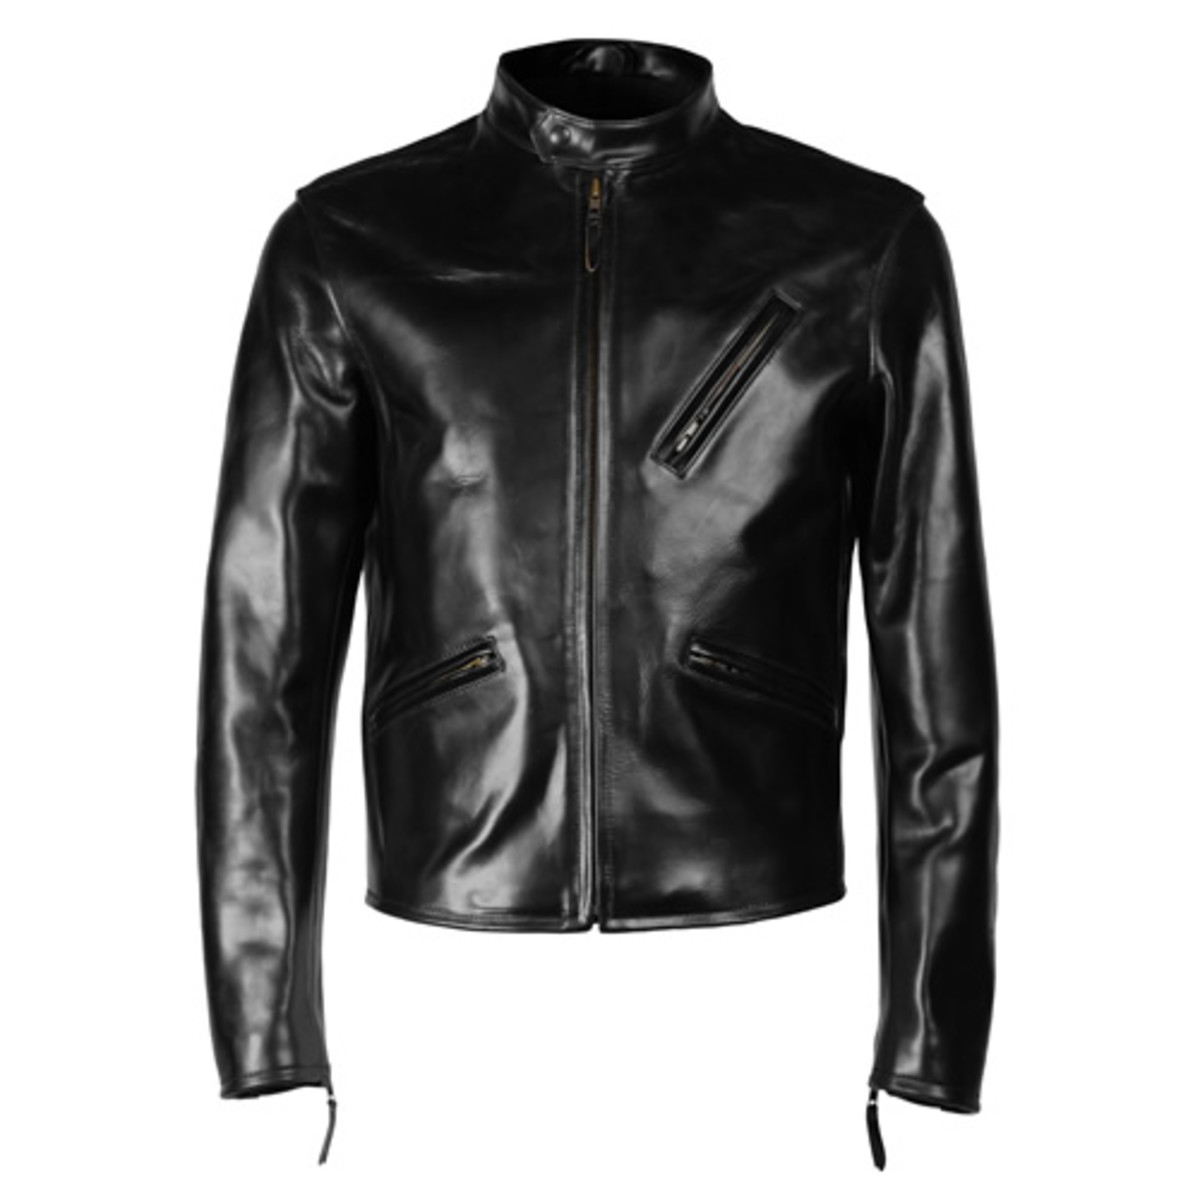 Triple Aught Design Street Fighter Jacket - Acquire